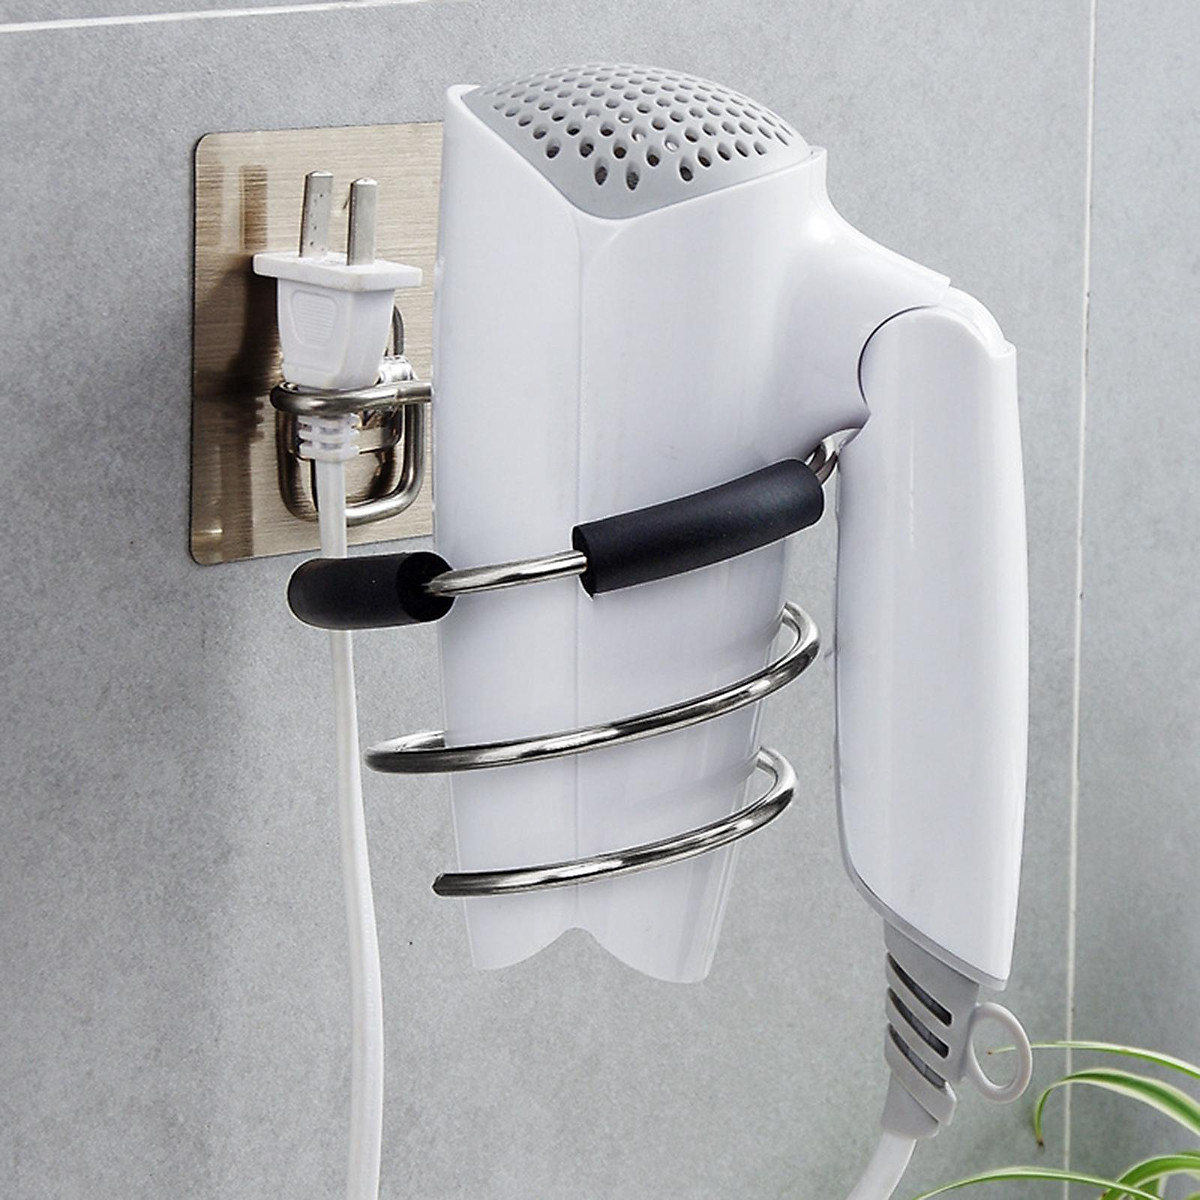 Pibbs Kwik Dry Wall-Mounted Hair Dryer for Salons